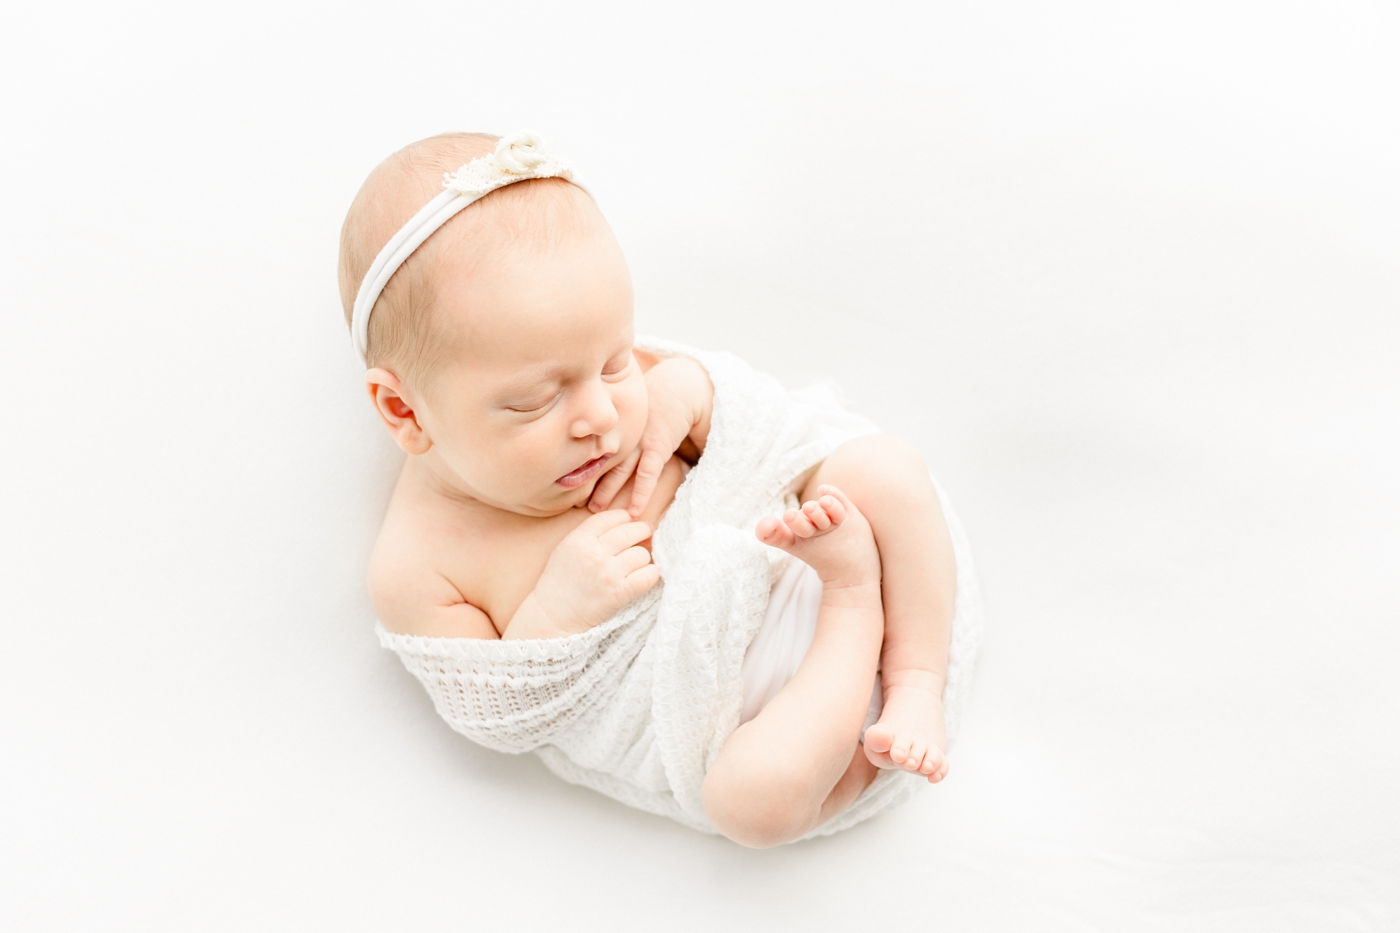 Sleeping baby in white knit swaddle during posed newborn session. Photo by Sana Ahmed Photography.